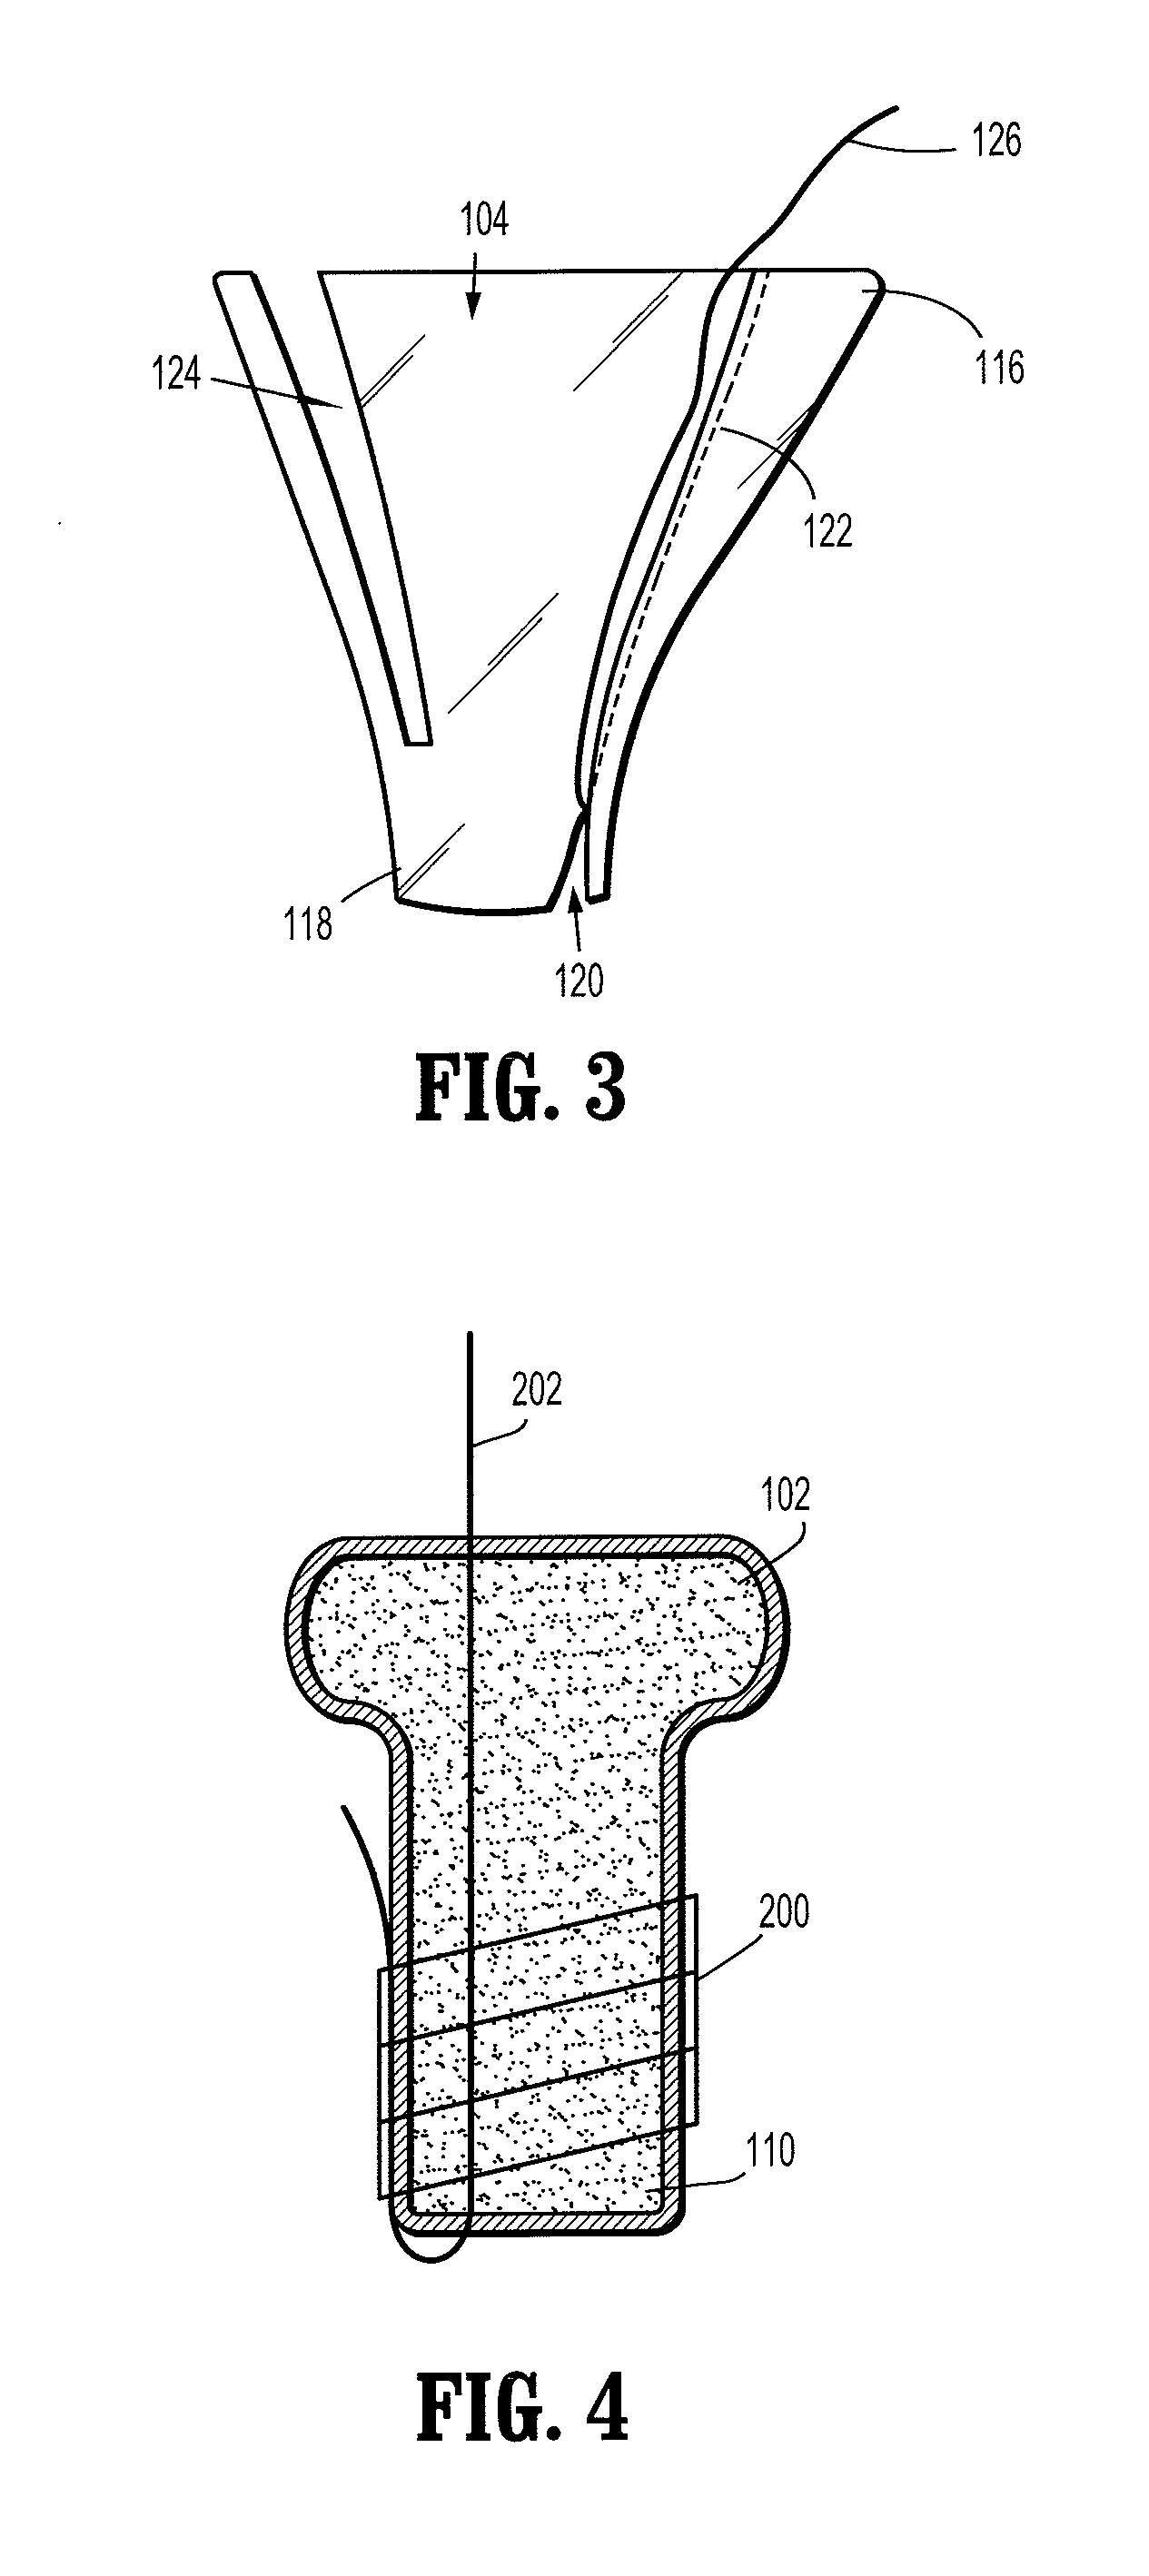 Surgical port and frangible introducer assembly